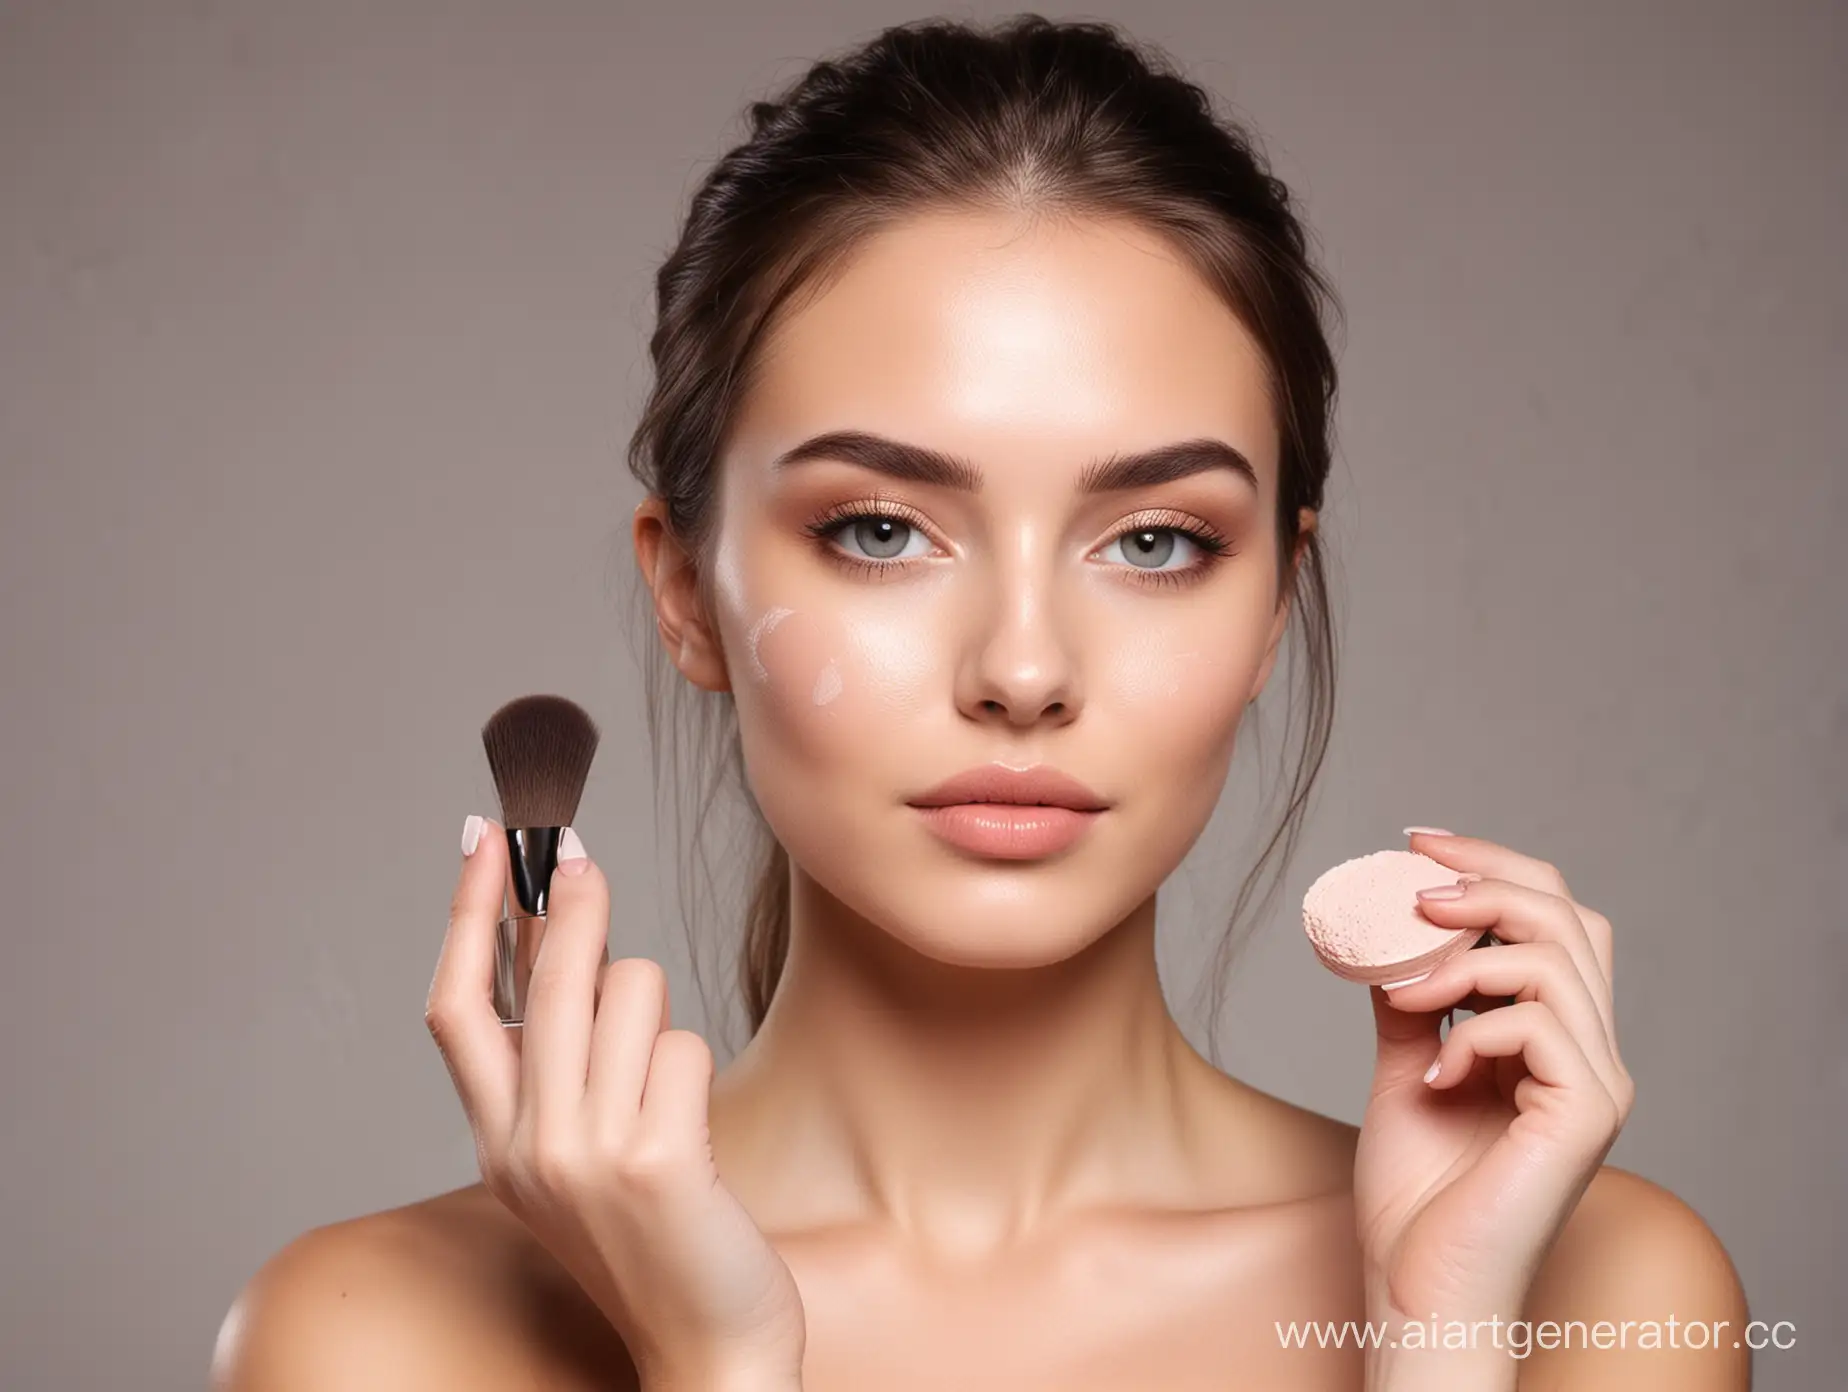 Young-Girl-Applying-Face-Powder-with-a-Brush